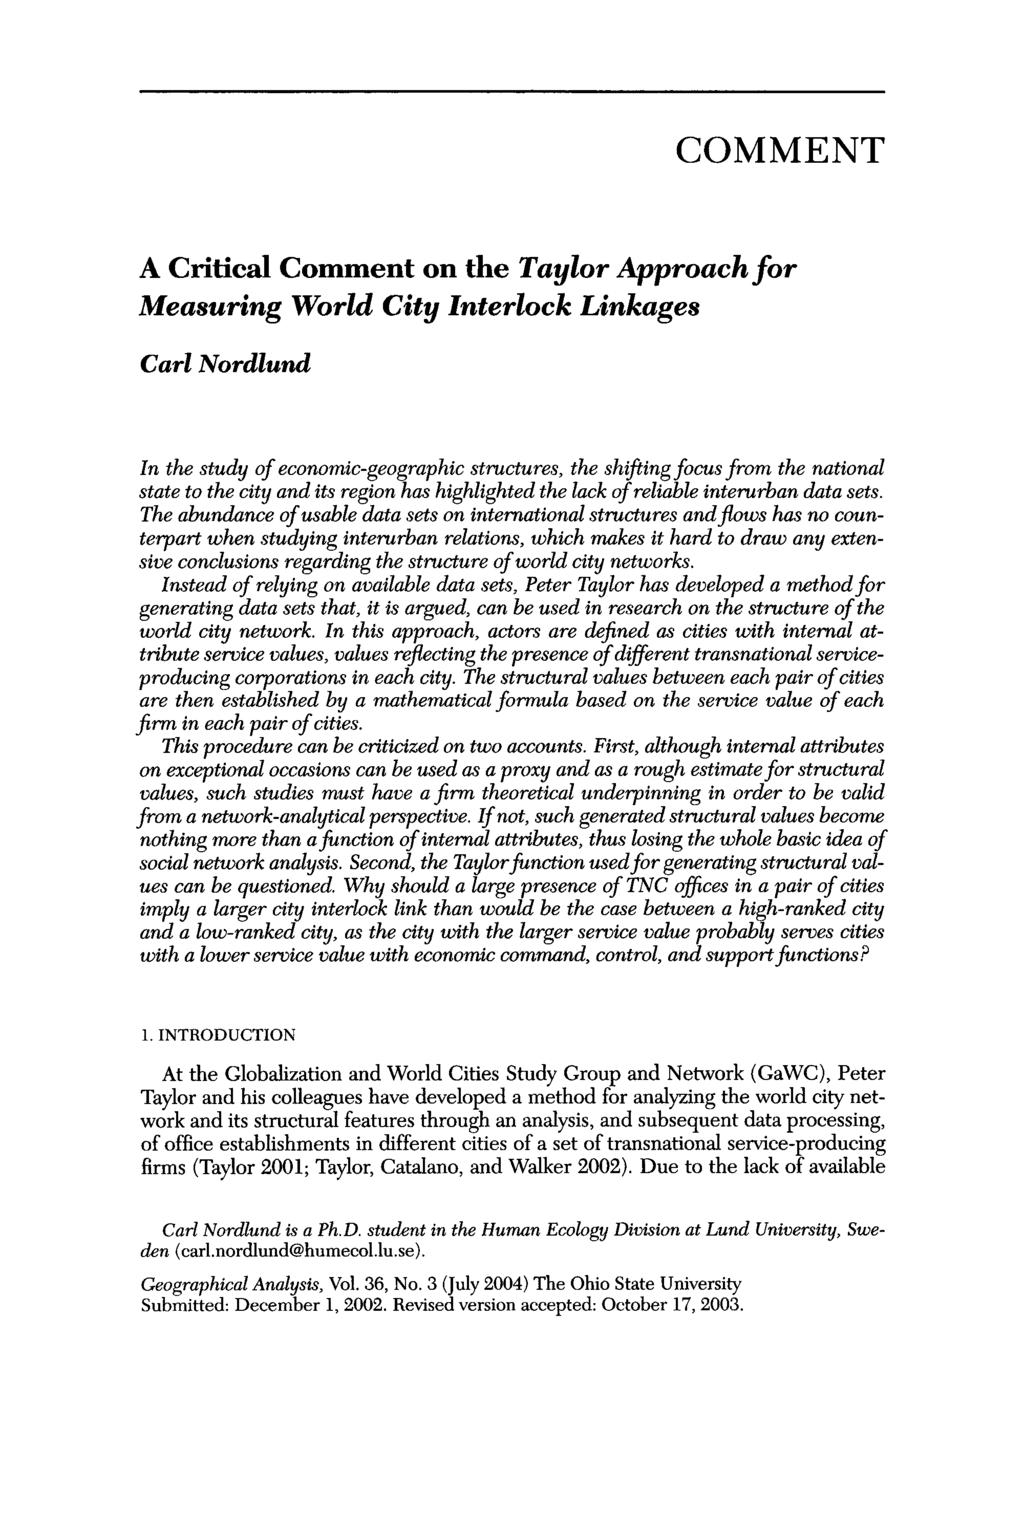 COMMENT A Critical Comment on the Taylor Approachfor Measuring World City Interlock Linkages Carl Nordlund In the study of economic-geographic structures, the shijling focus from the national state